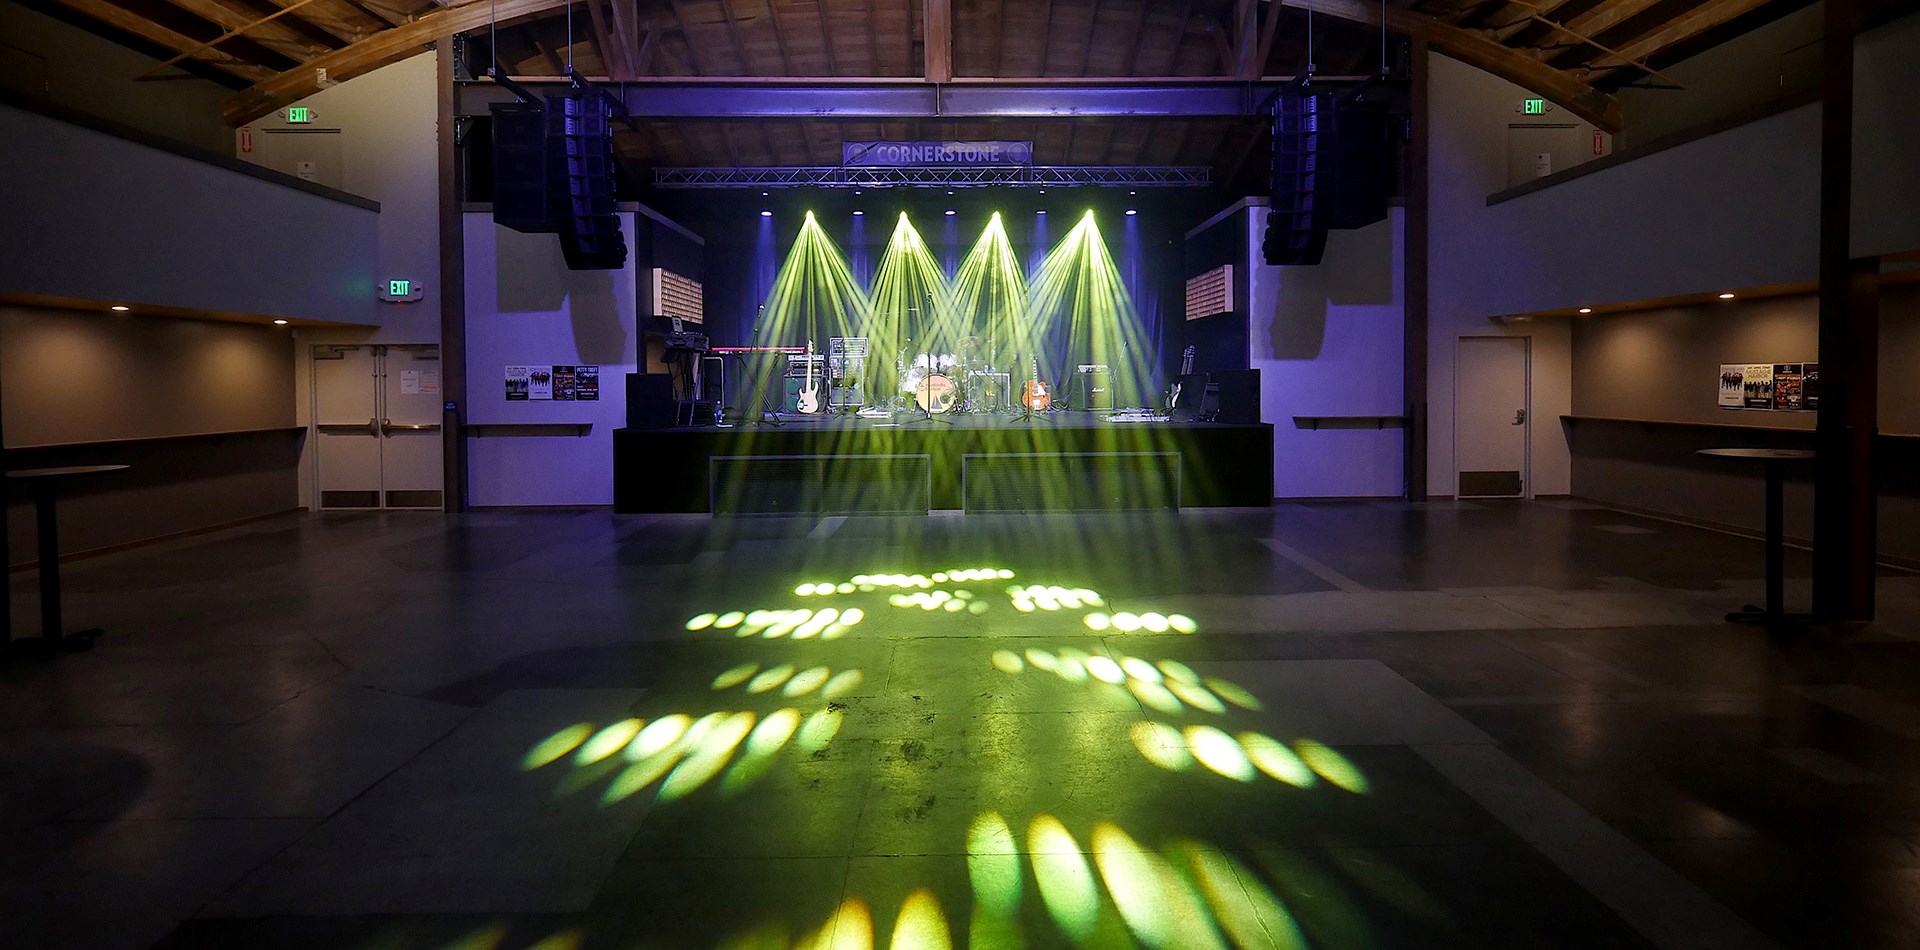 Cornerstone Live Music Venue Delivers a World-Class Audio and Visual Experience with HARMAN Professional Solutions